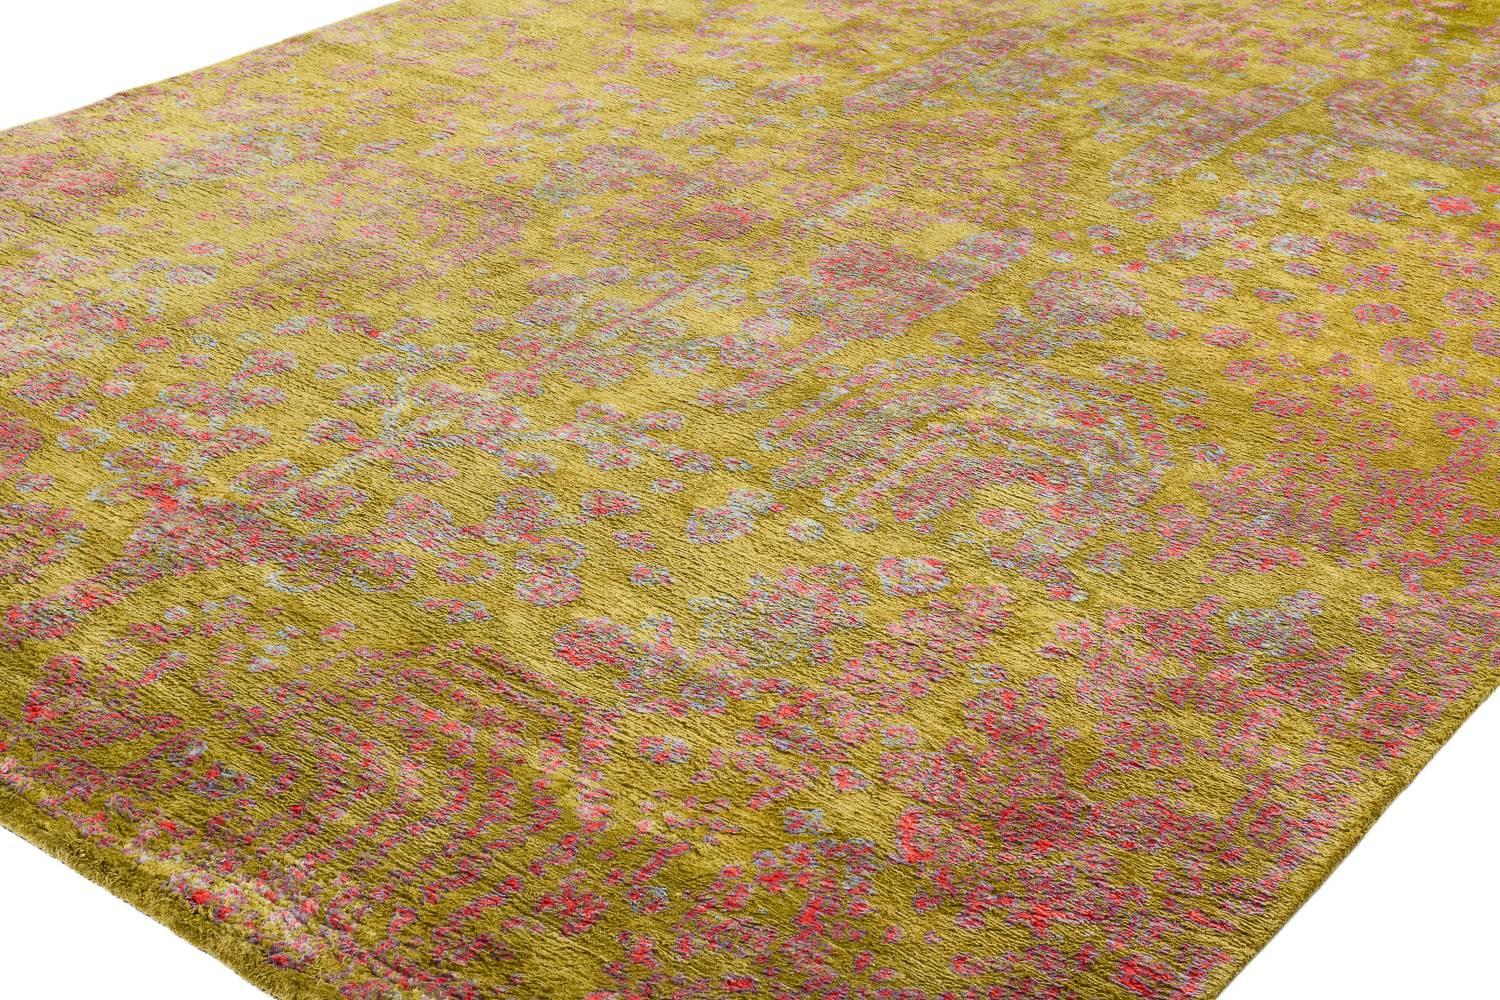 The 'Ankara' design is a glistening, delightful jewel within our collection. It’s gorgeous, palette of violet, pink, chartreuse and baby blue gives it an uplifting palette. In 100% silk with a plush pile height, this rug is as soft as can be and